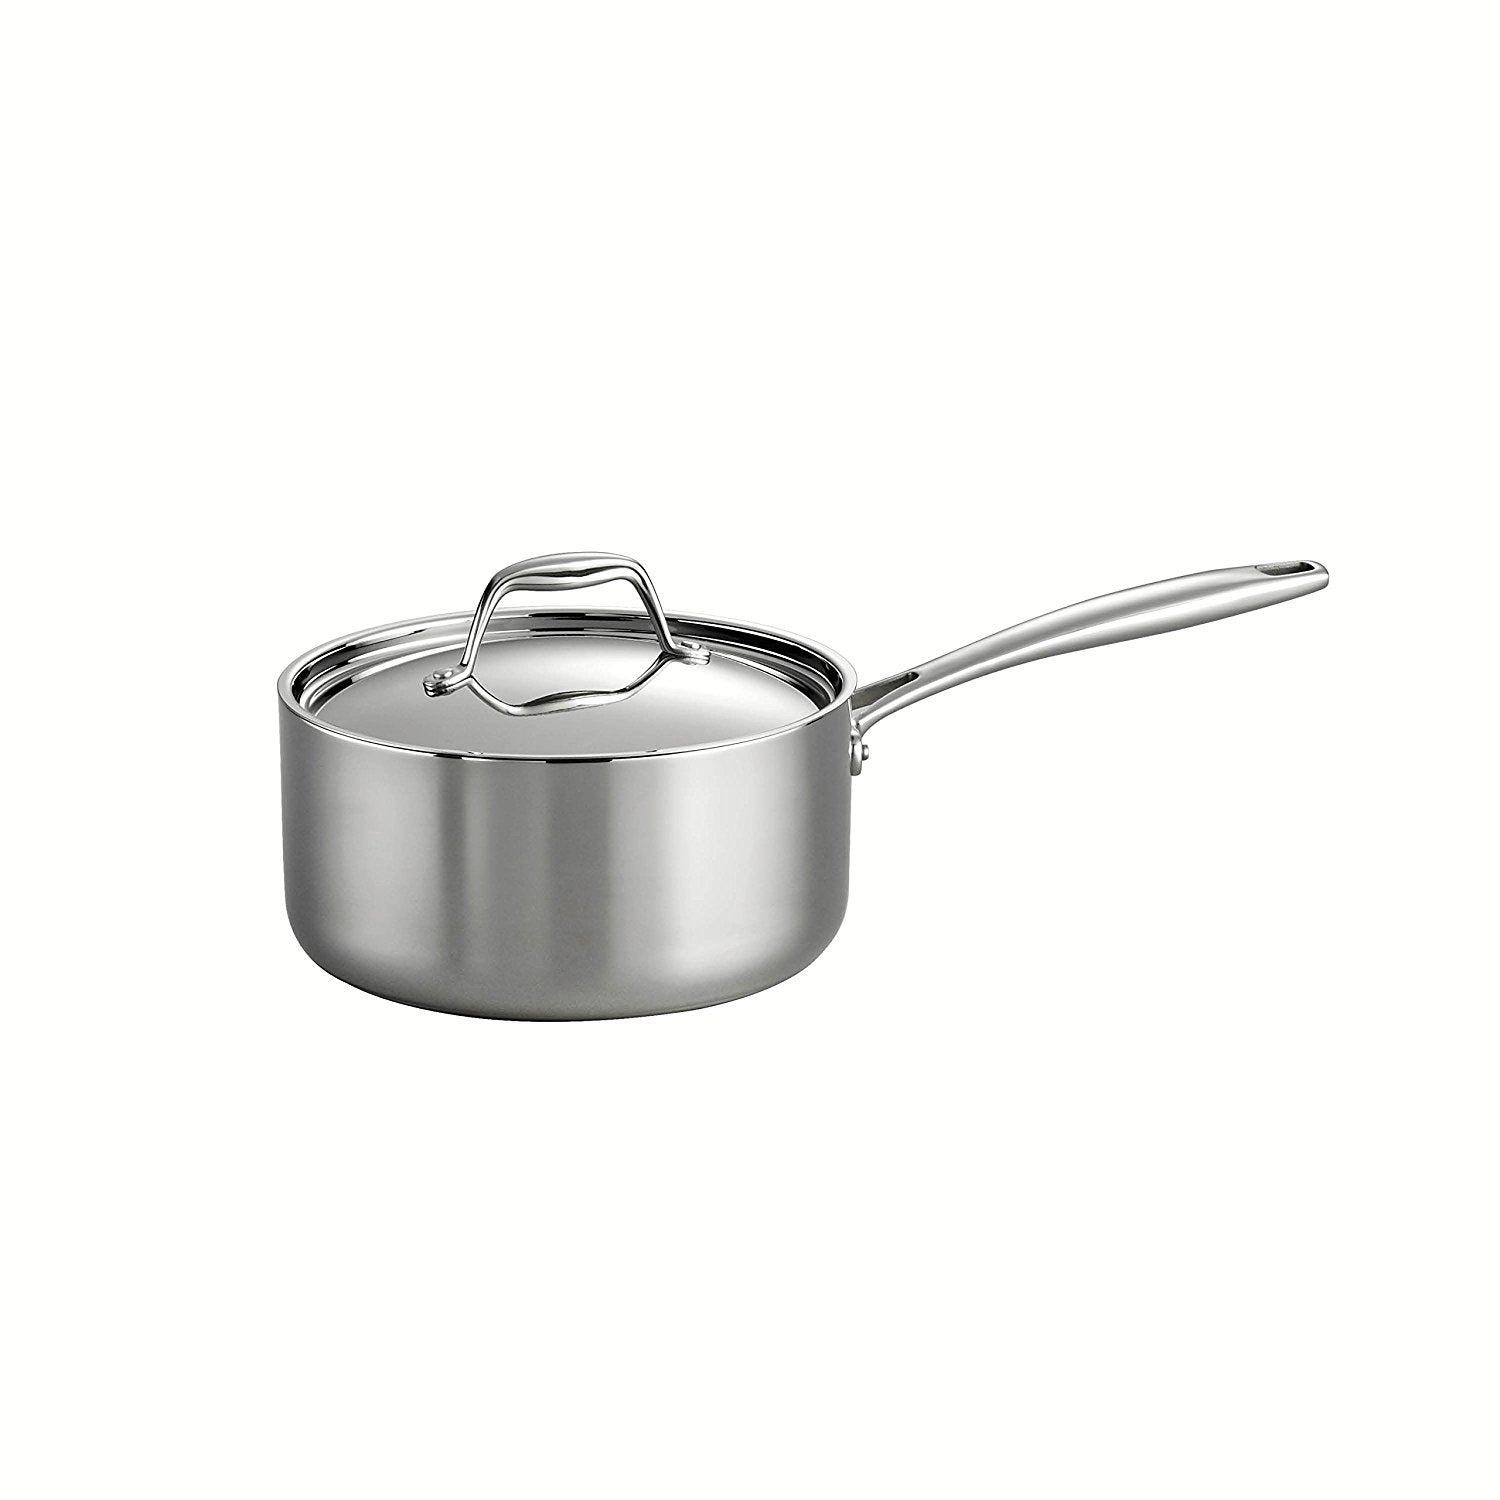 Tramontina 80116/023DS 3QT Gourmet Tri-Ply Clad Covered Sauce Pan, Stainless Steel - Induction Ready, Dishwasher Safe, Oven Safe COOKPOT